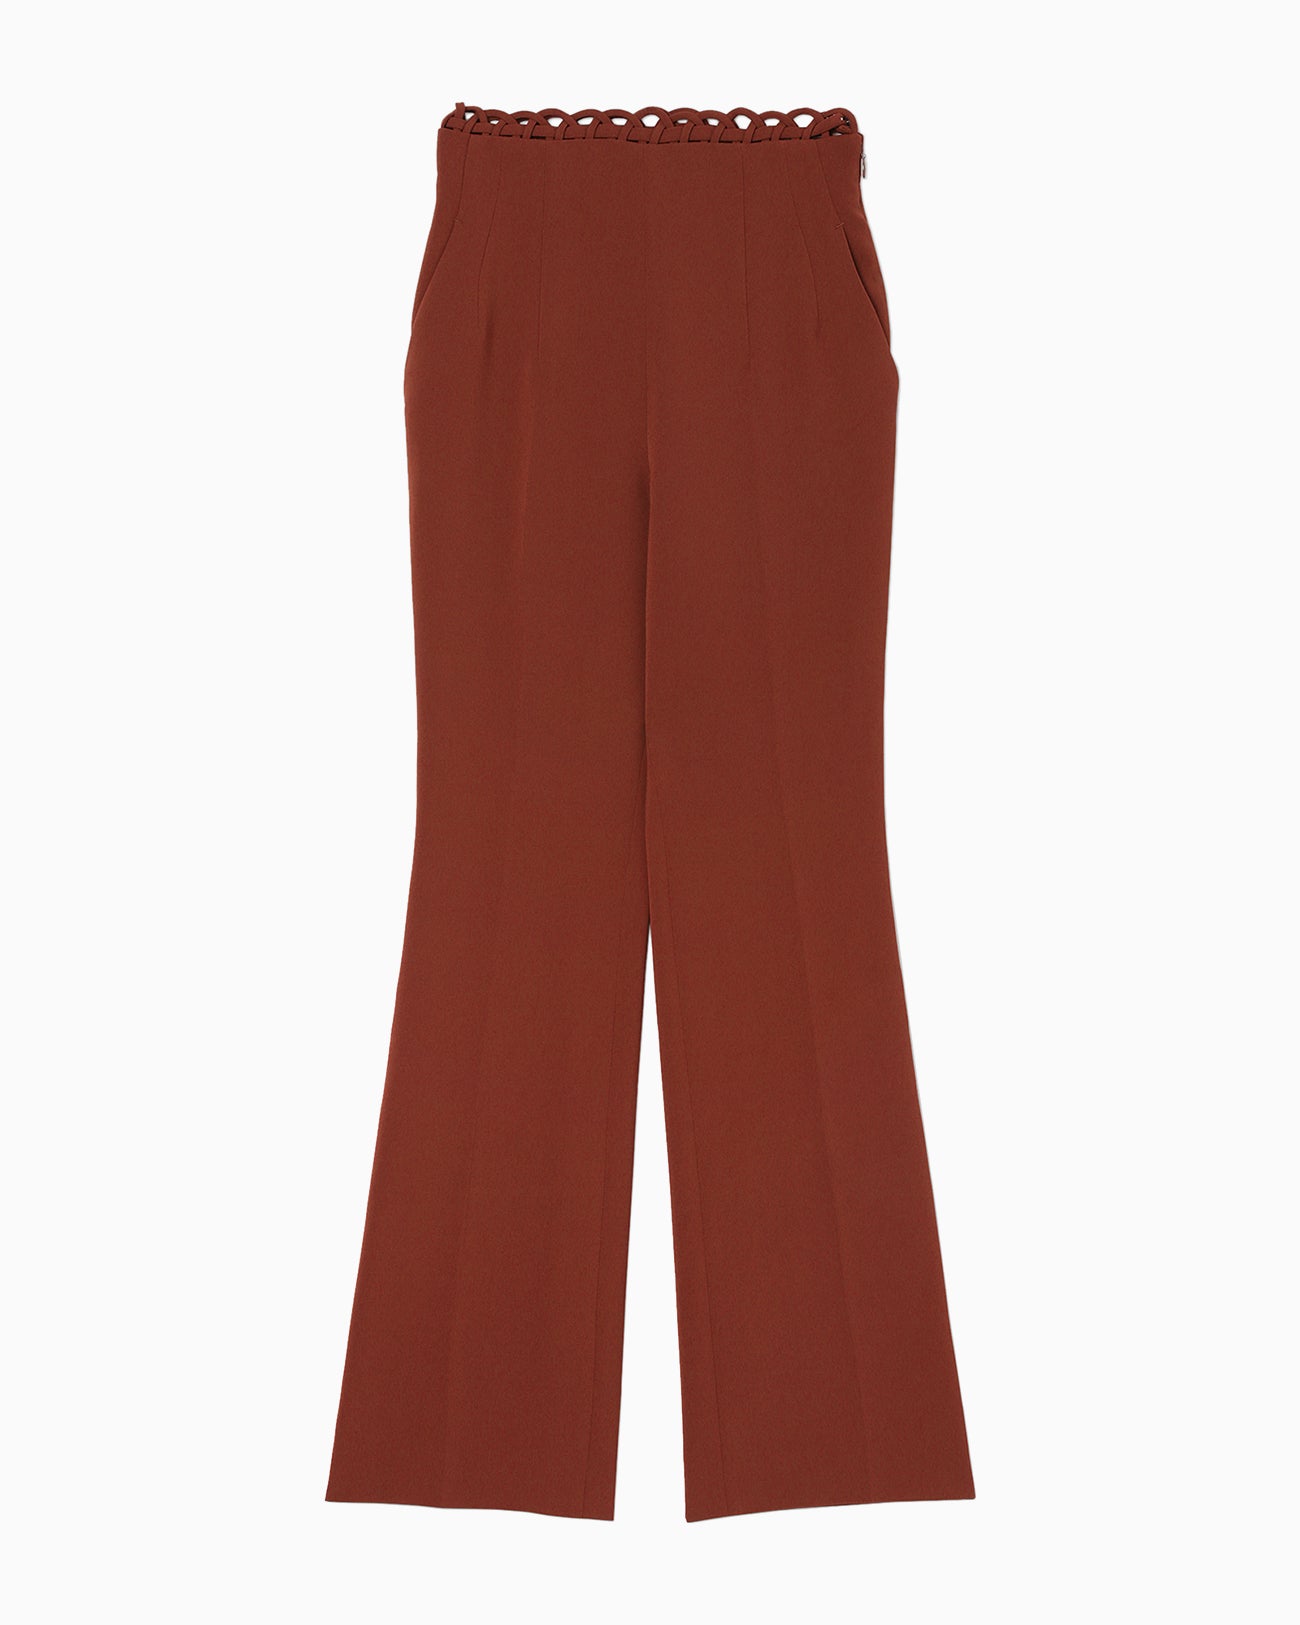 Stretched Triacetate Basket Pattern Trousers - brown